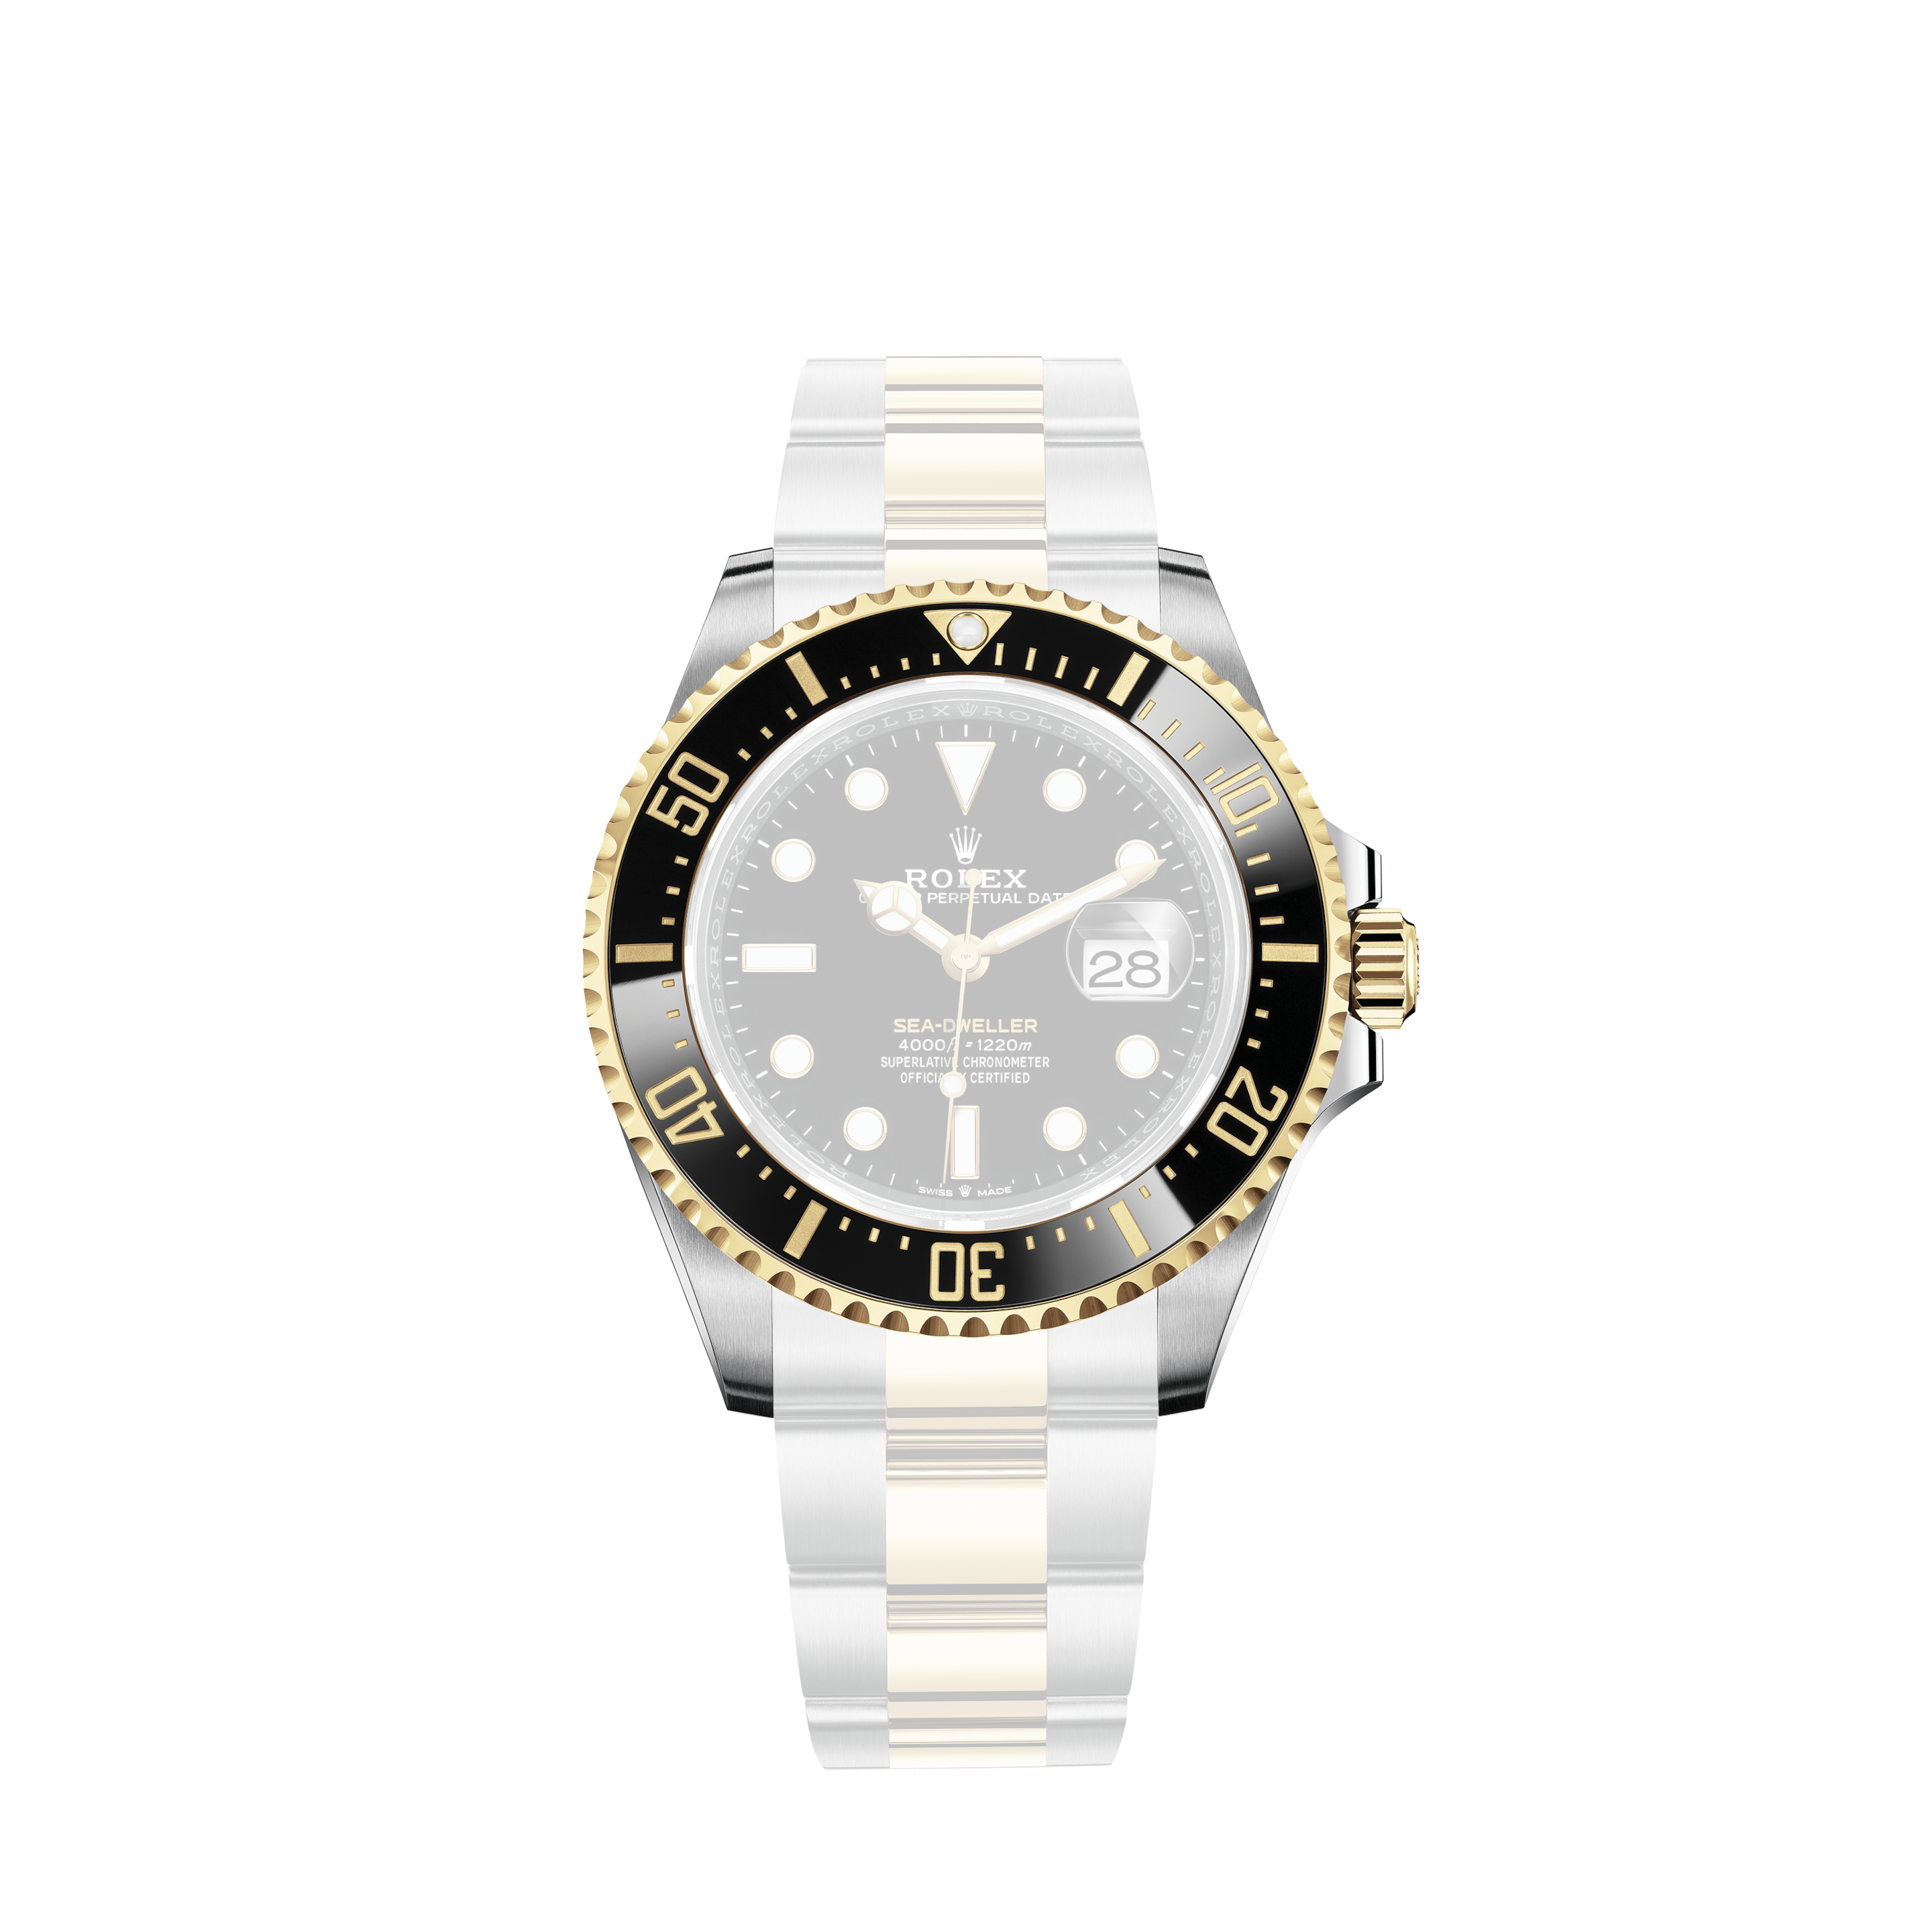 Rolex Lady-Datejust 26mm 69173 in Steel & Gold with Silver Diamond Dial - box and papersRolex Lady-Datejust 26mm BOX ONLY 6916